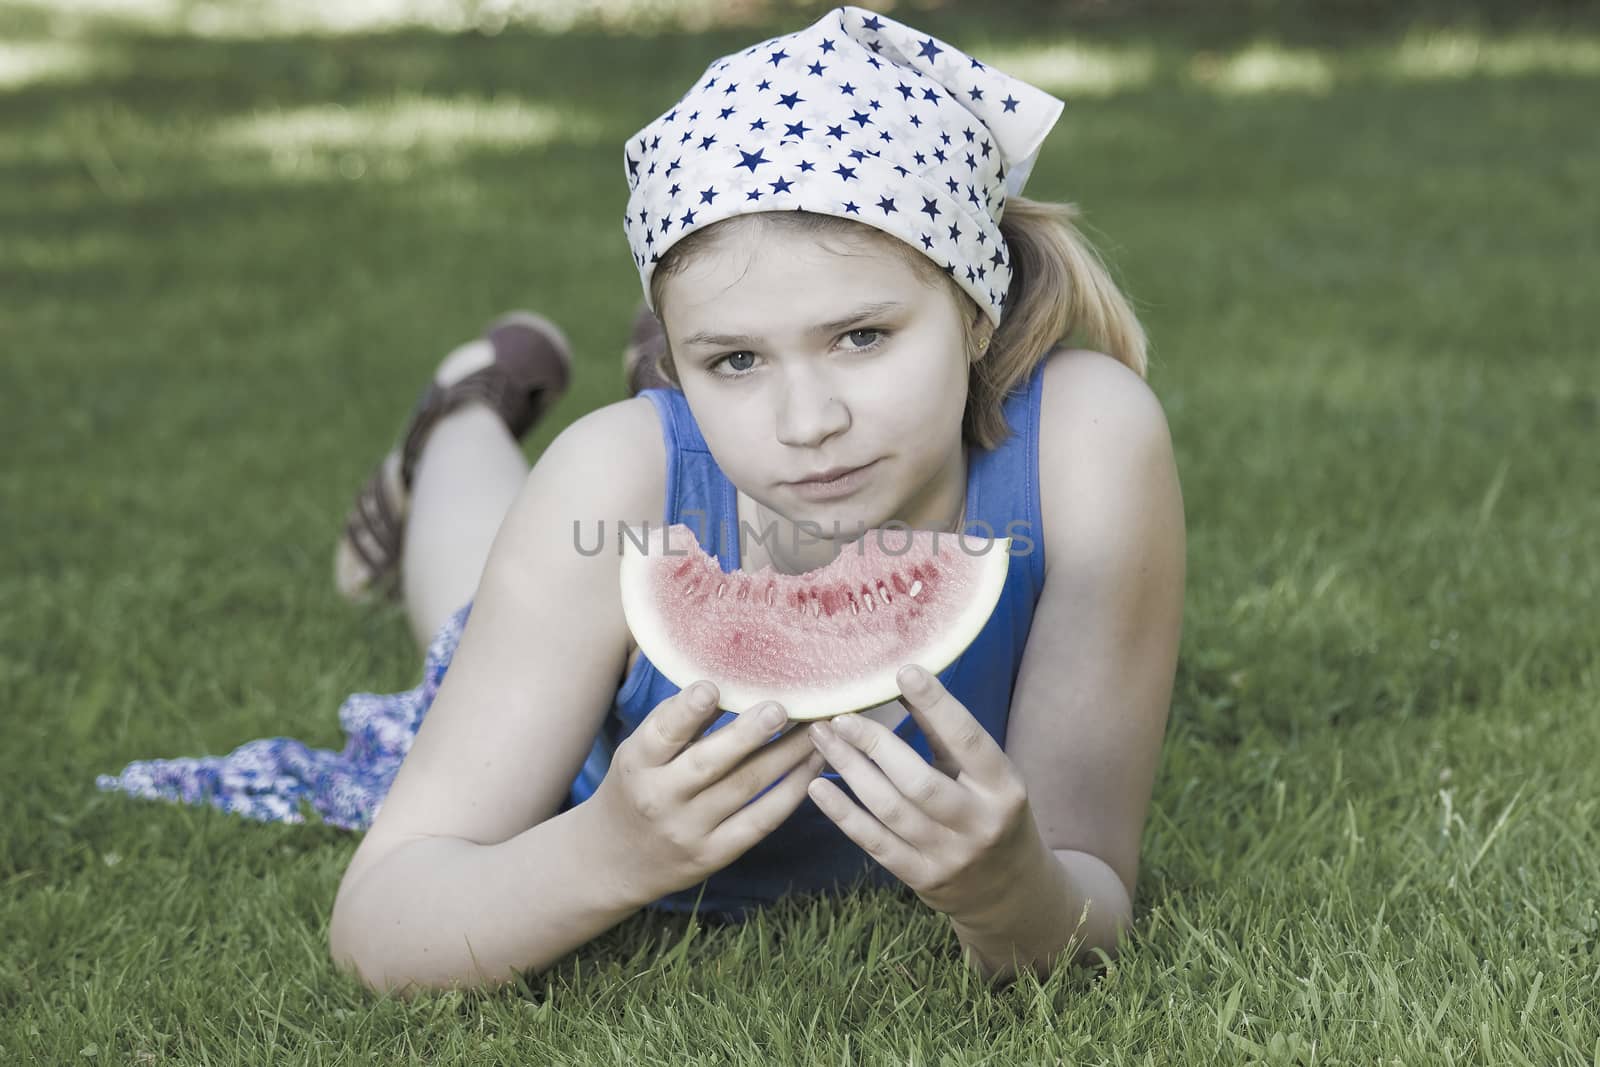 cute little girl eating watermelon on the grass